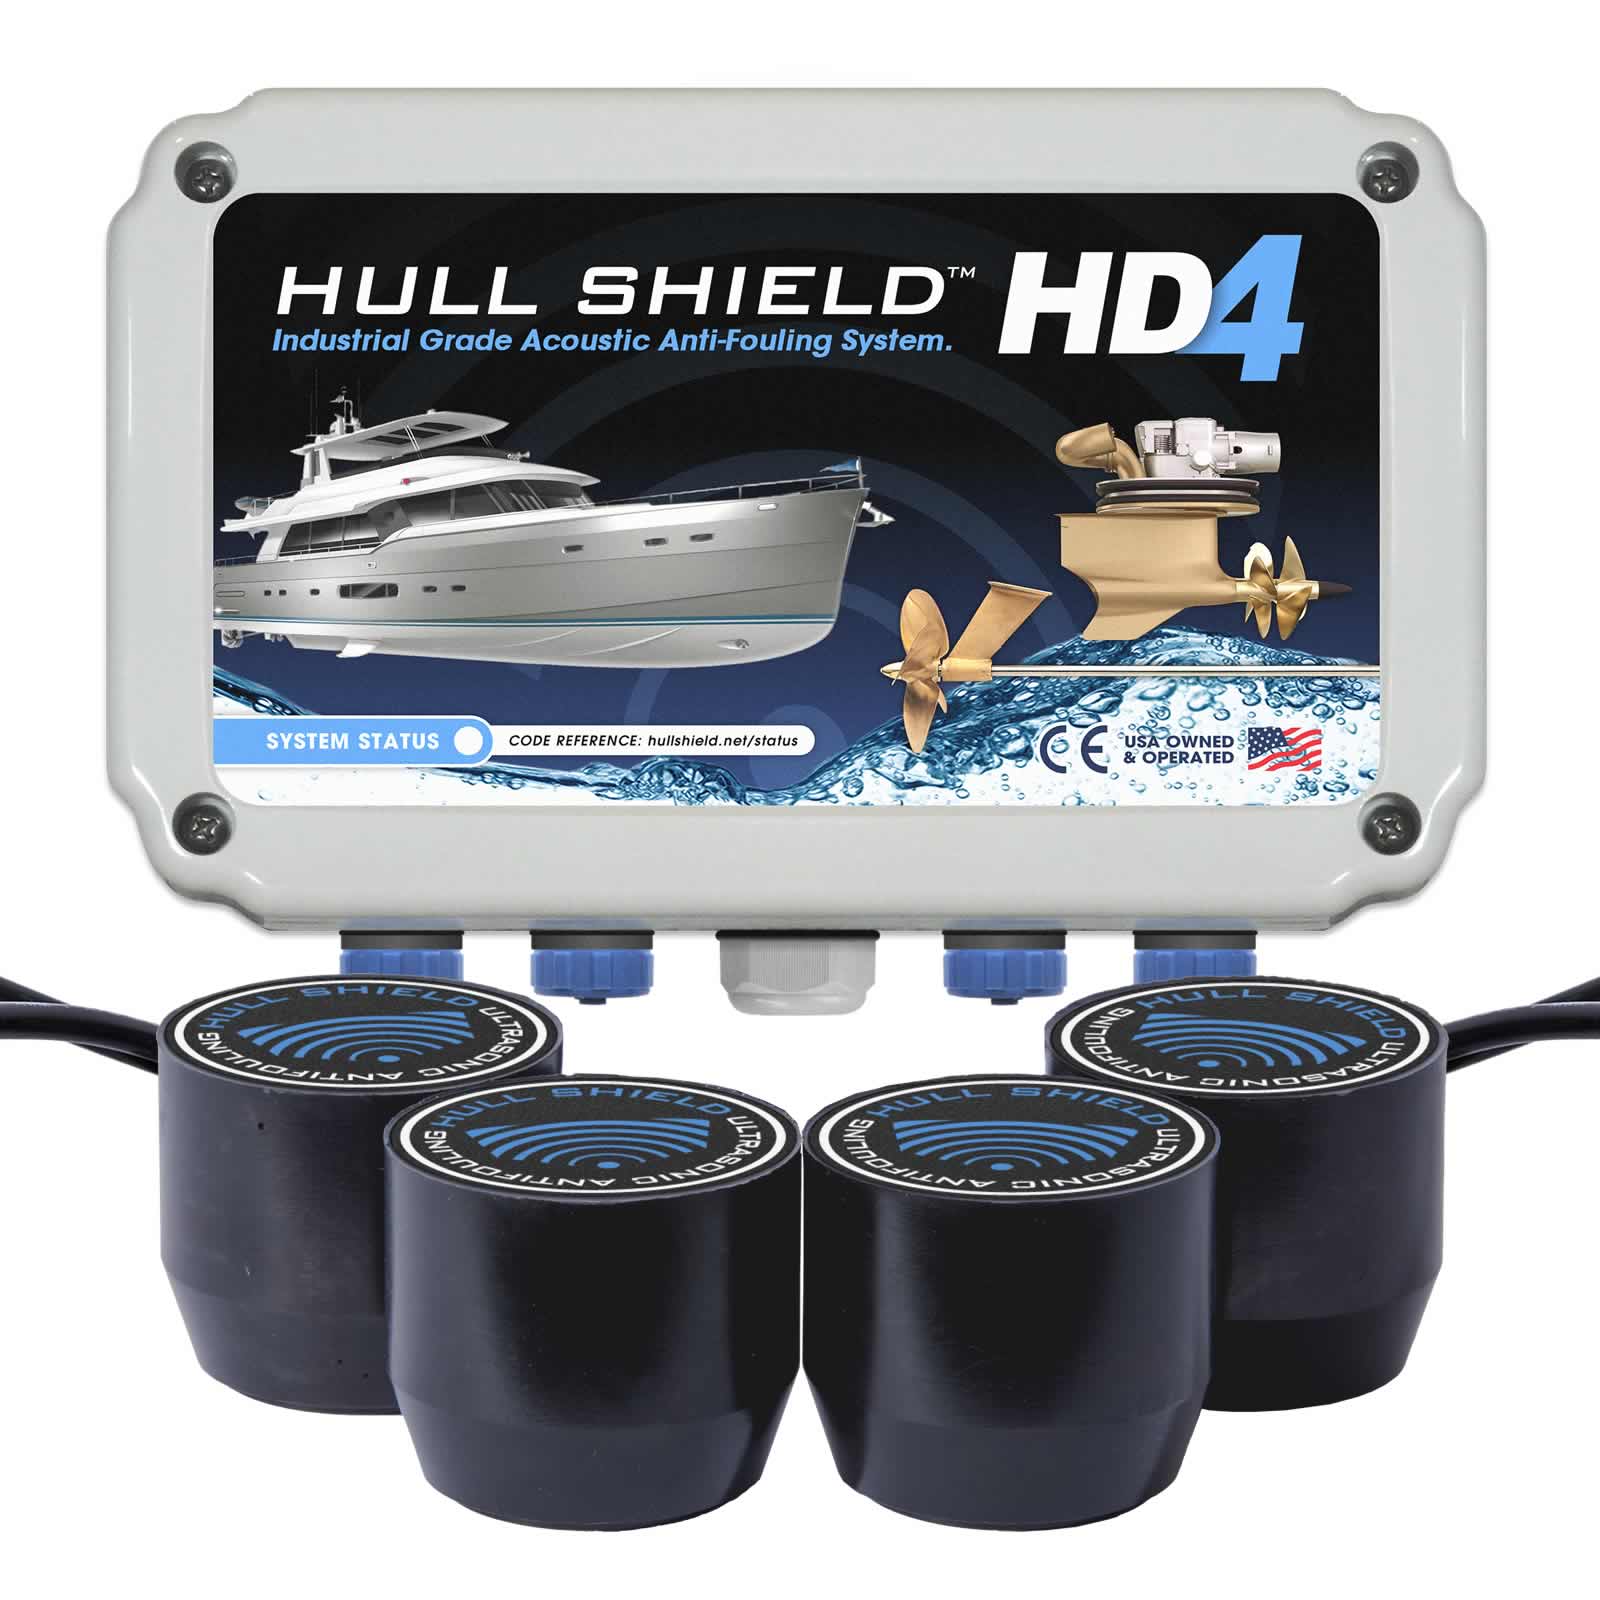 The Hull Shield HD4 ultrasonic antifouling system for boats protects bottom paint and gear with ultrasound.